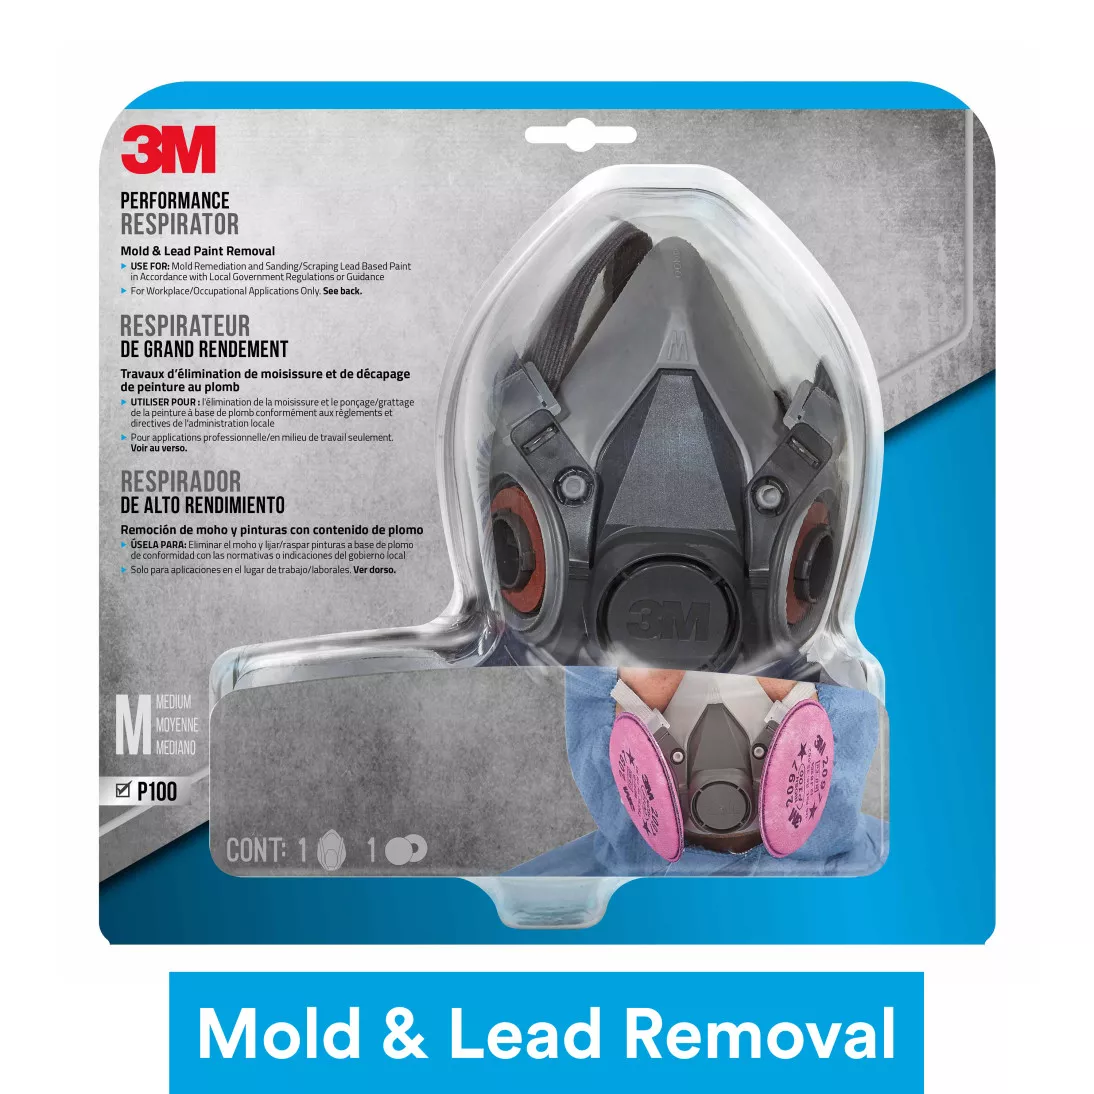 3M™ Performance Mold and Lead Paint Removal Respirator P100, 6297P1-DC,
Size Medium, 1 each/pack, 4 packs/case